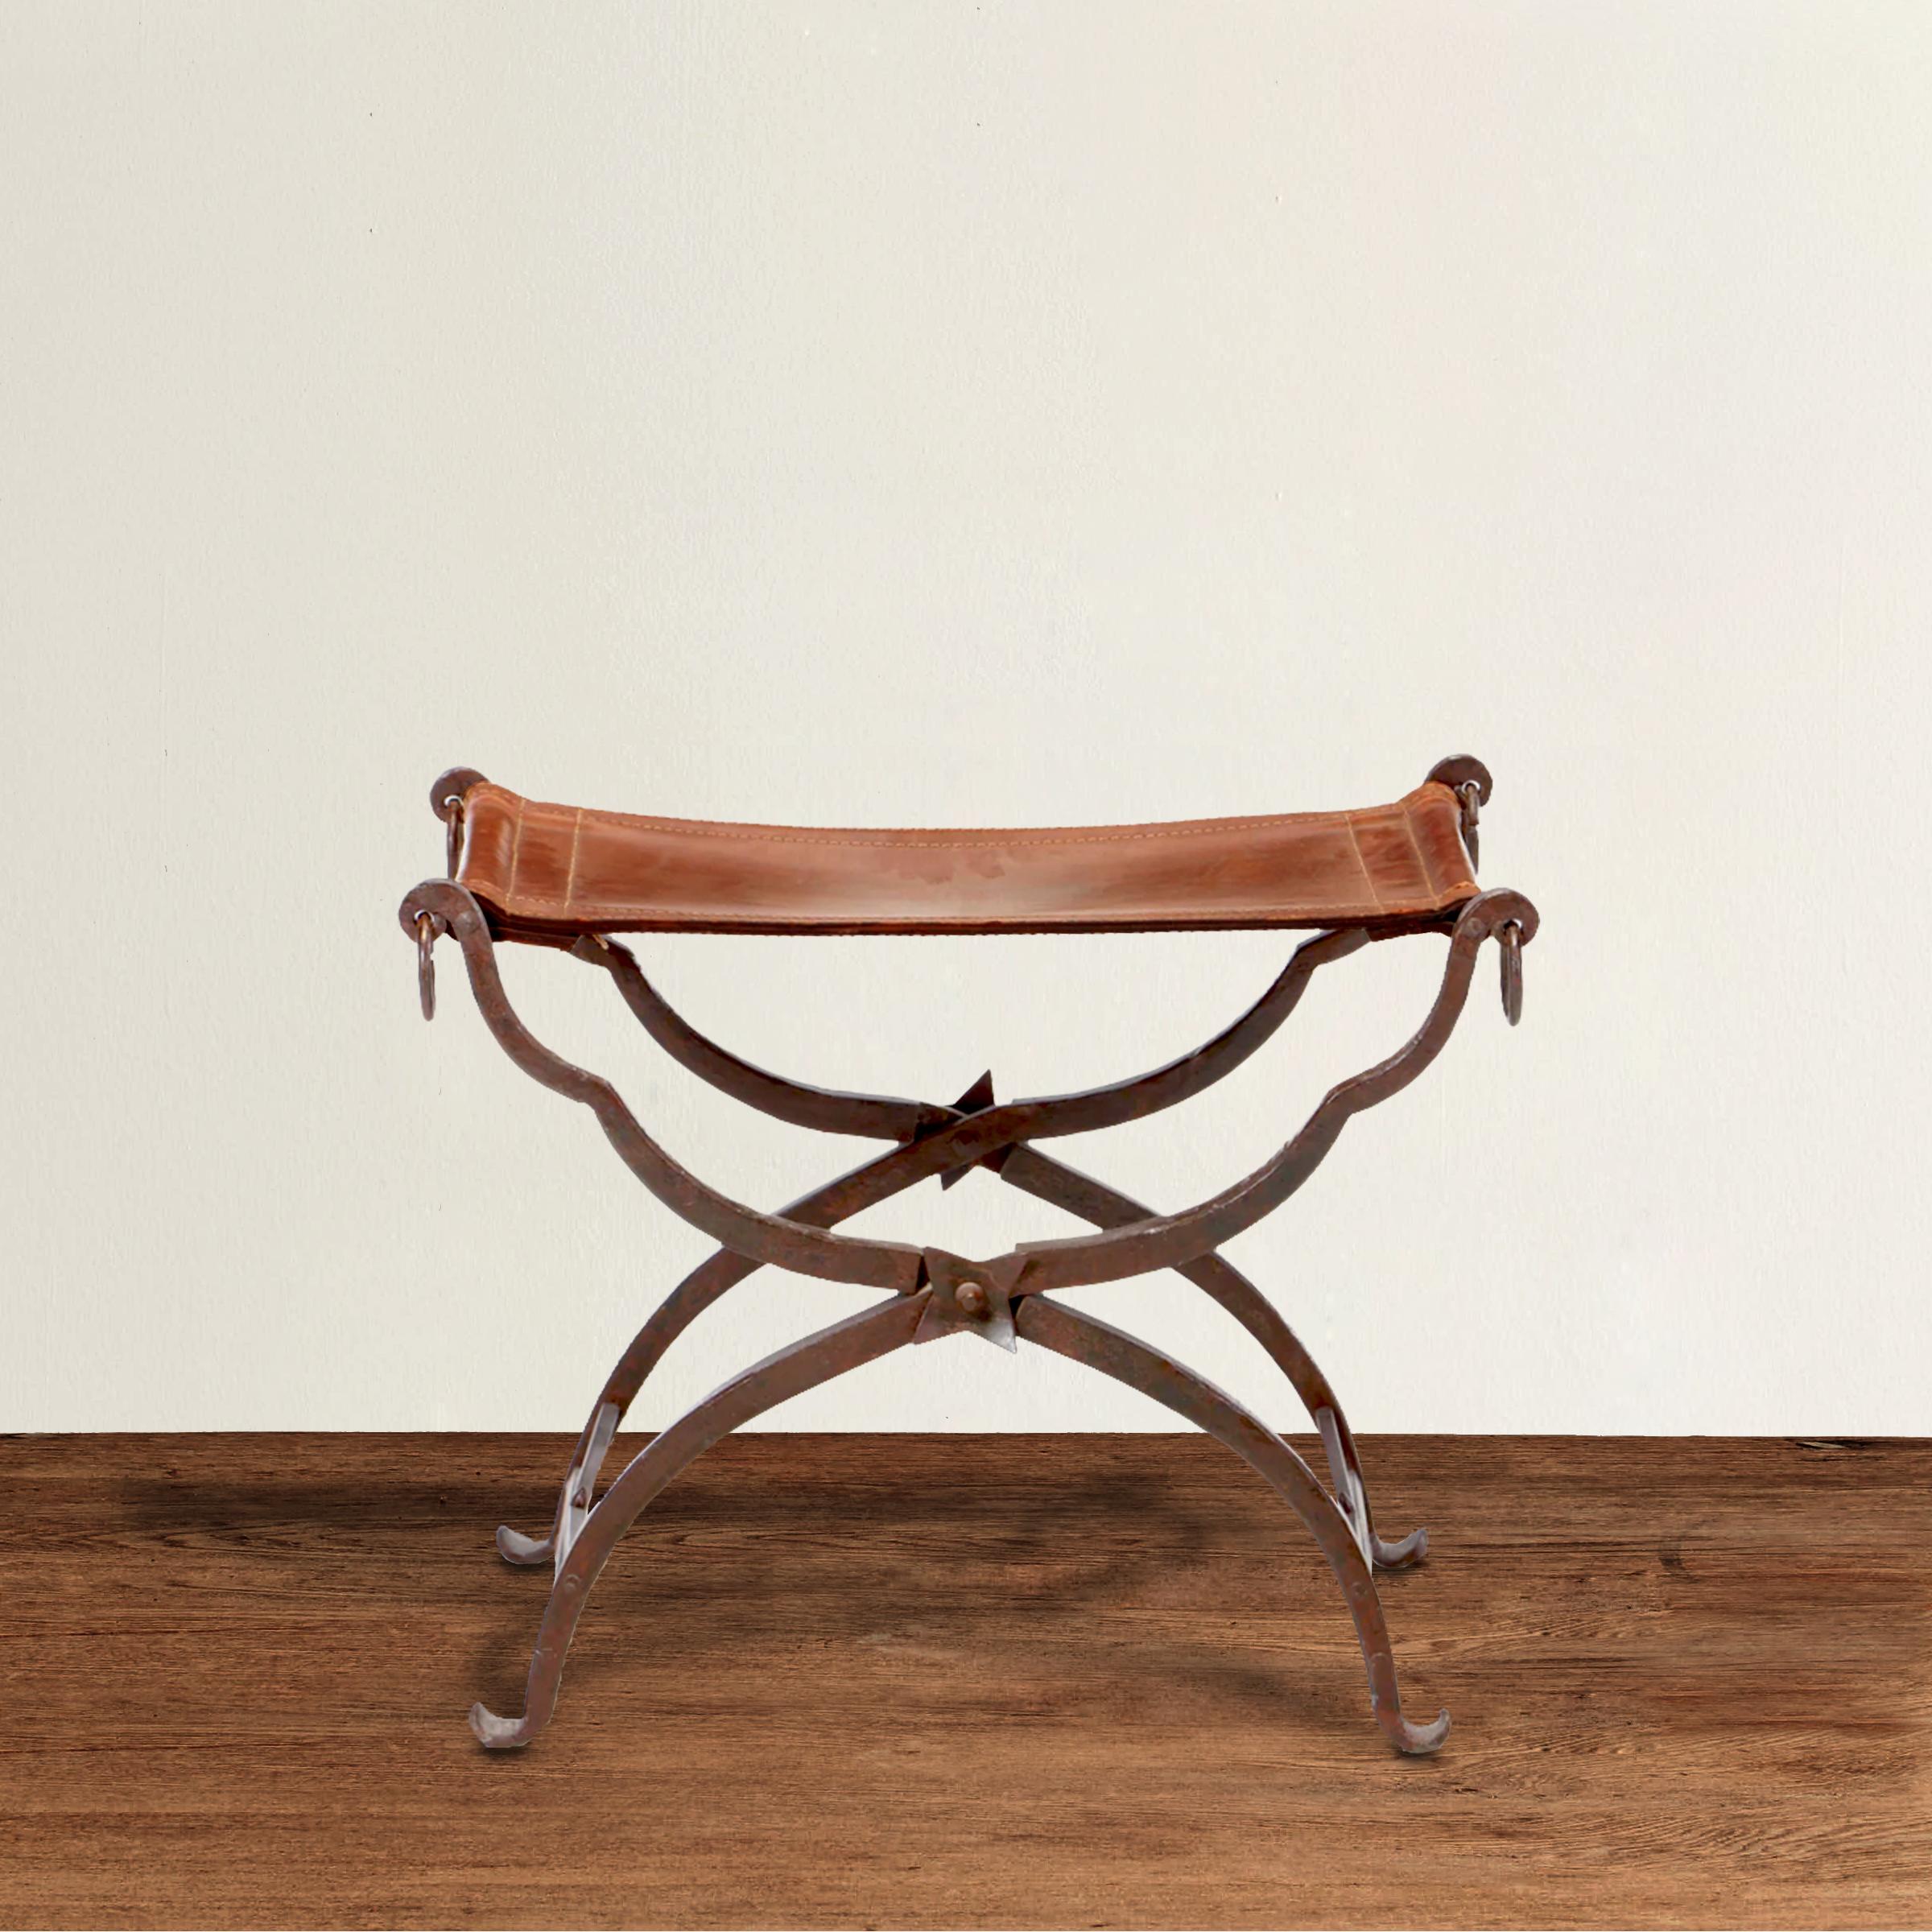 An incredible 19th century Italian wrought iron folding Curule stool with a hand-stitched saddle leather seat, rings on the ends, and decorative stars where the legs cross on both sides. Curule seats were designed by early Romans and was seen as a